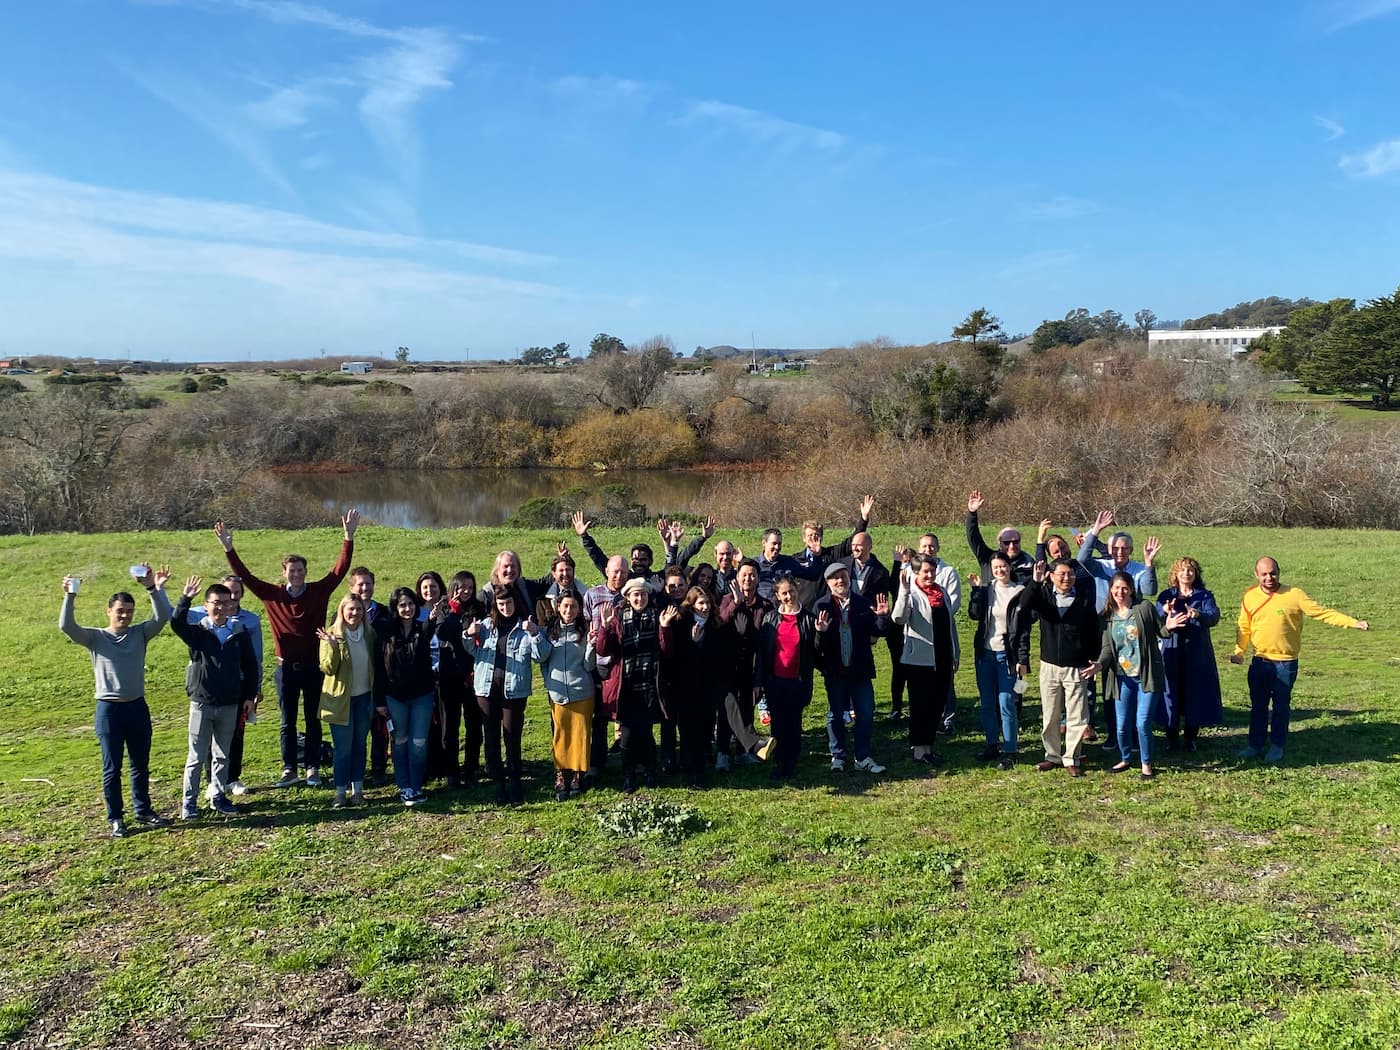 Participants at CZI's Single-Cell Data Ecosystem Workshop stand on a grassy field while waving at the camera